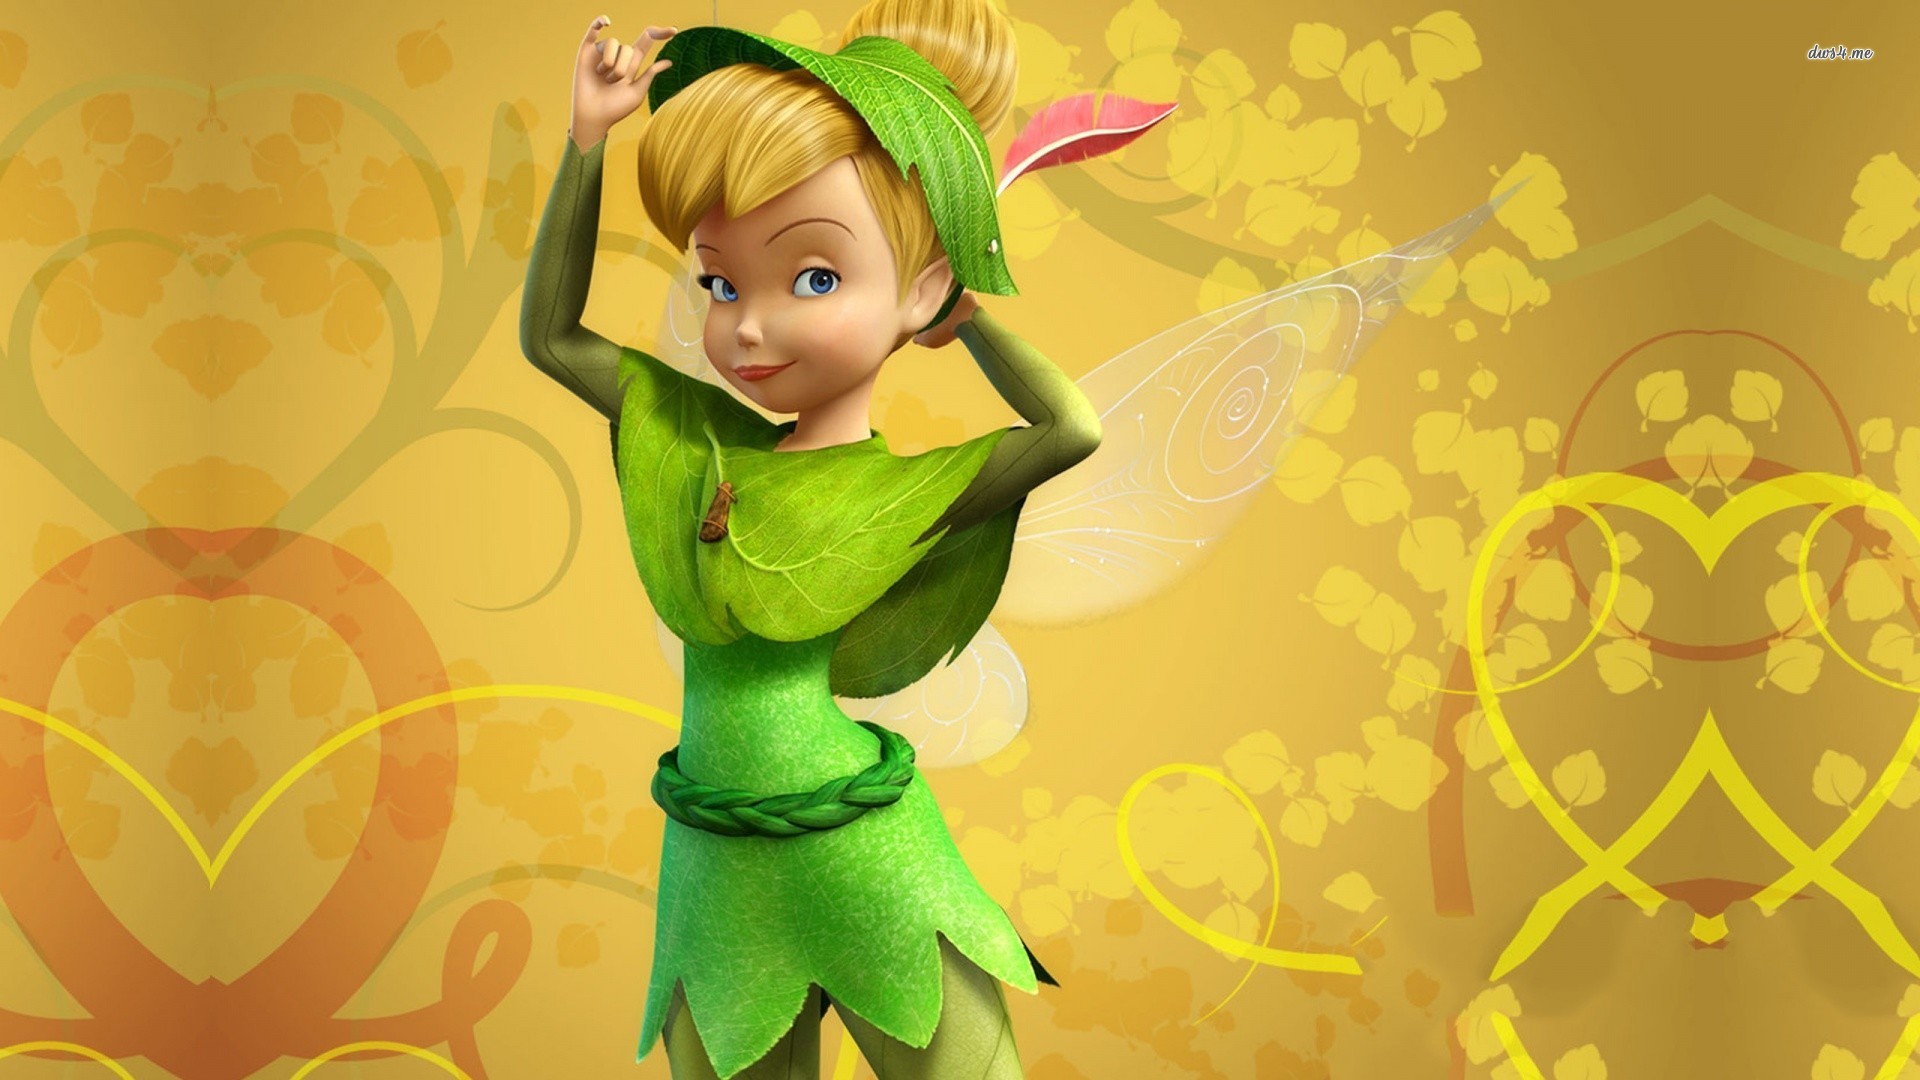 Tinker Bell In Peter Pan Outfit Wallpaper - Tinkerbell Wallpaper Hd , HD Wallpaper & Backgrounds